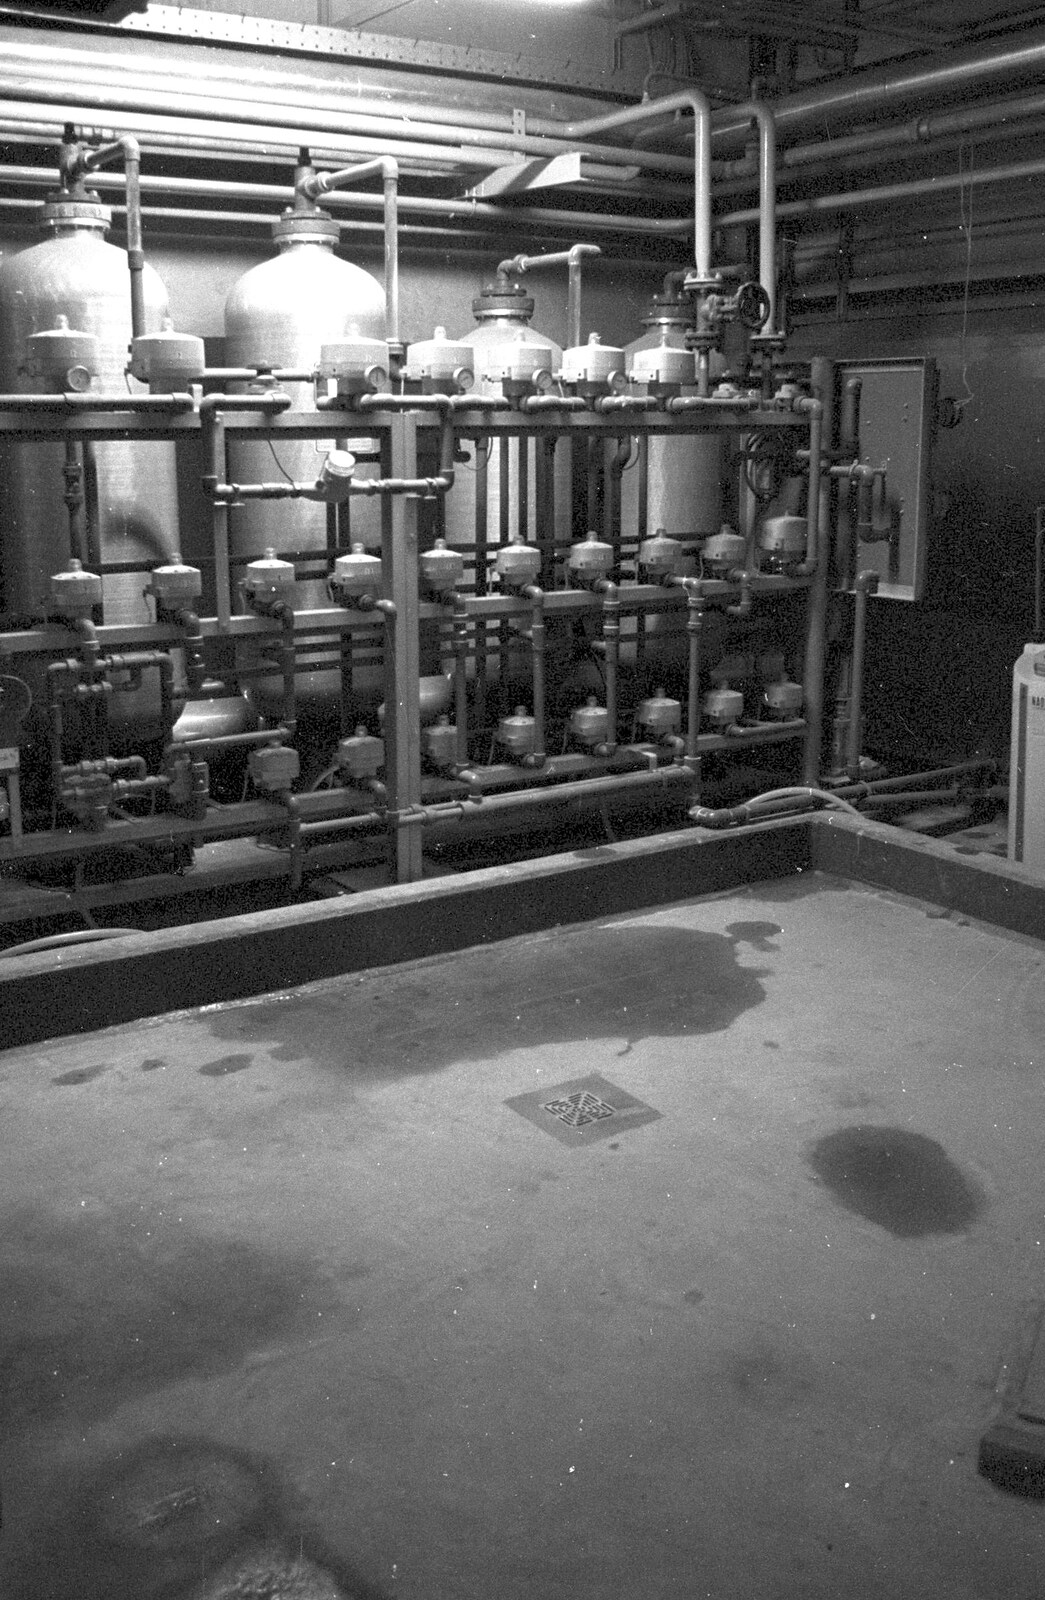 The World's First "Chicken Shit" Power Station, Brome, Eye, Suffolk - 11th July 1992: A room full of curious tanks